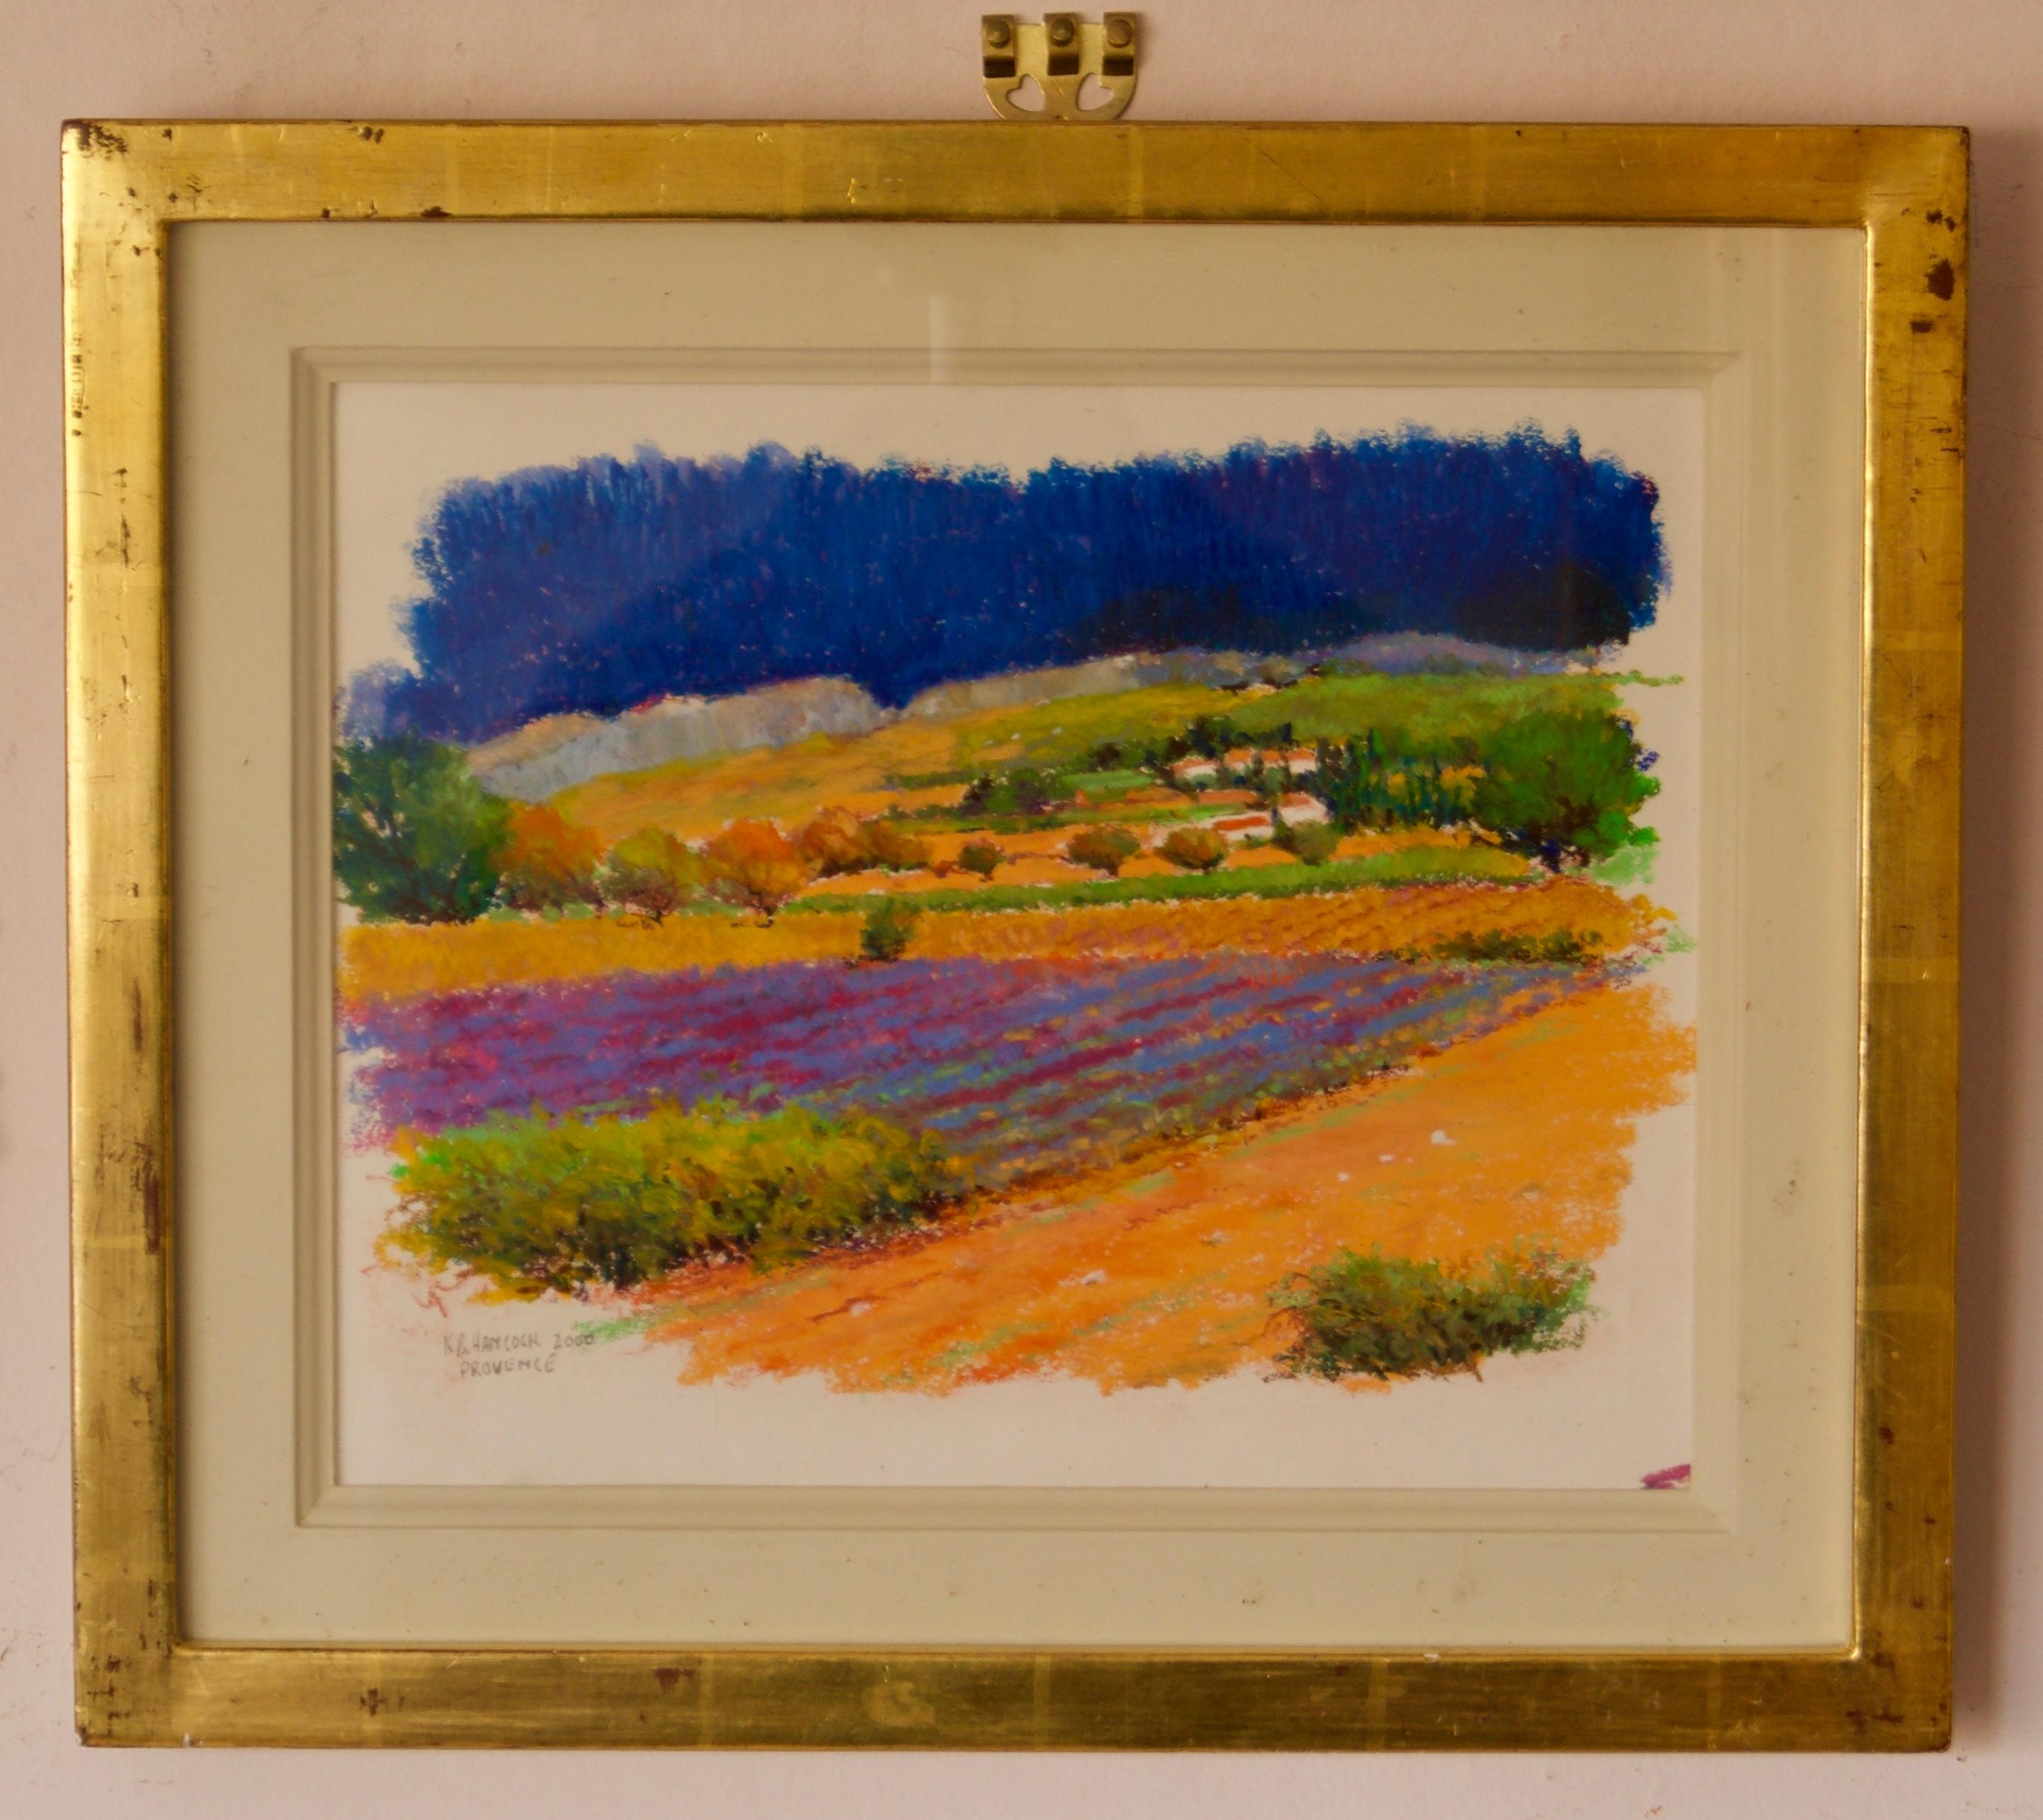 Provence South of France - Early 21st Century Landscape Oil Pastel by Hancock - Painting by K.B. Hancock